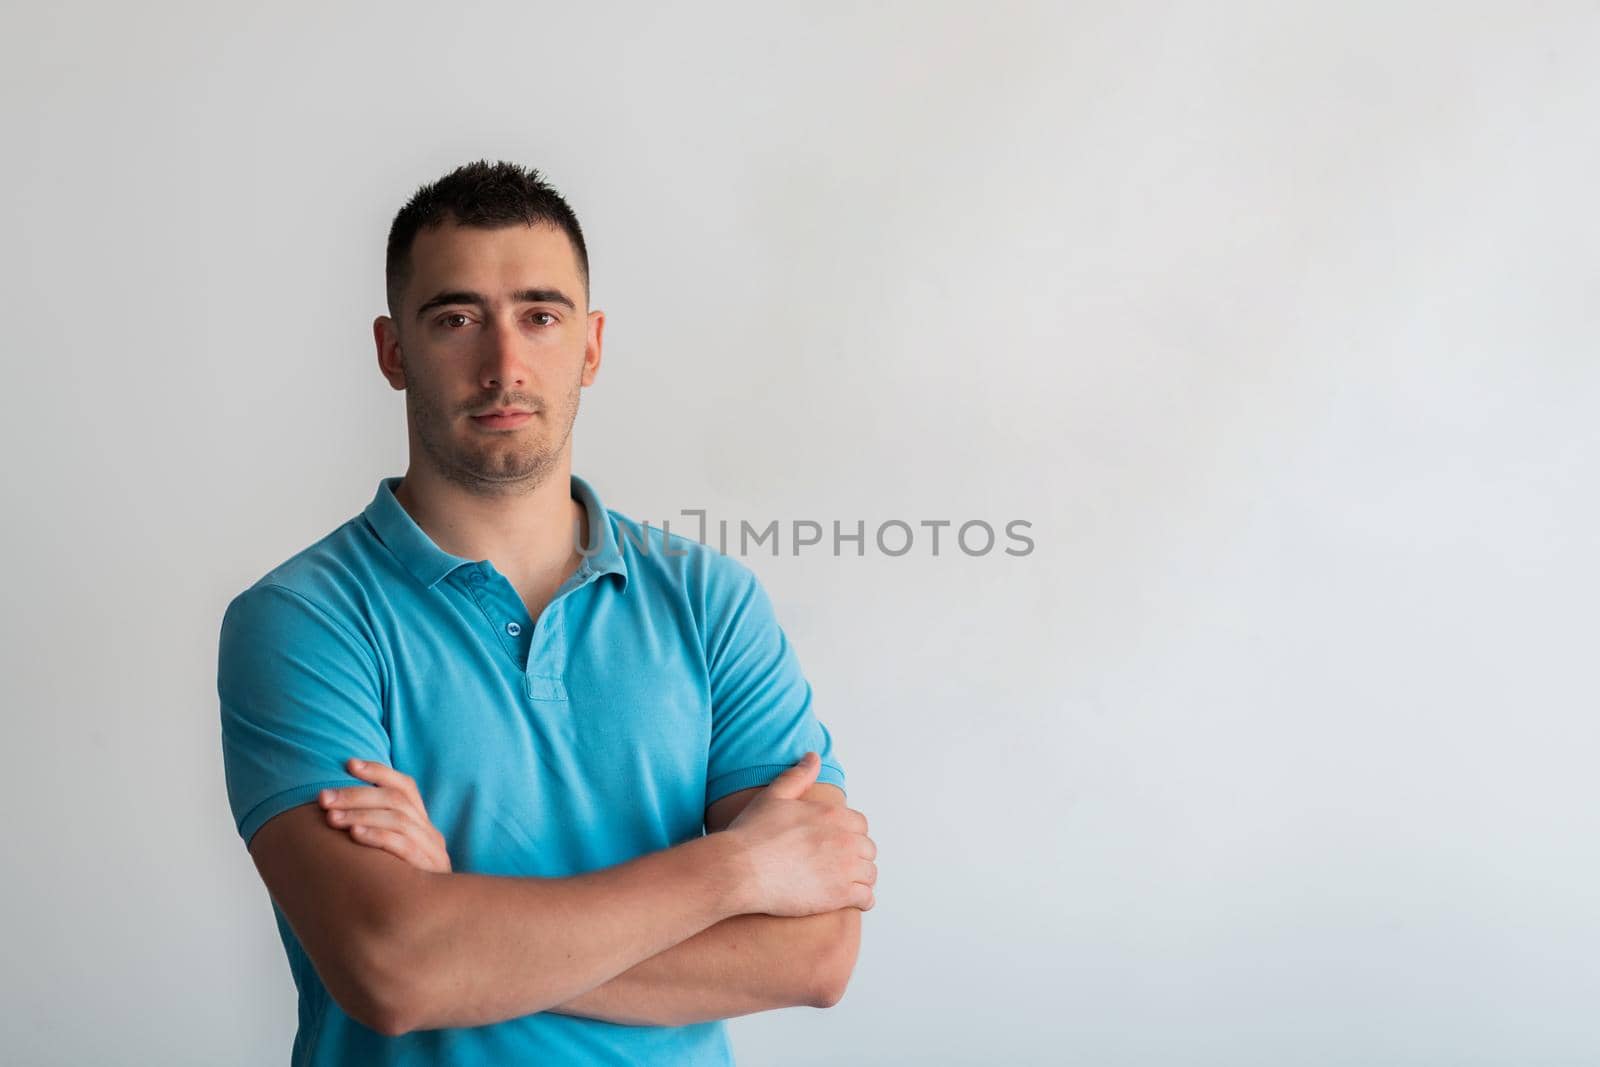 Formal business male portrait. A confident successful casual businessman or manager stands in front of a white background, arms crossed, looking directly at the camera and smiling friendly. High-quality photography.